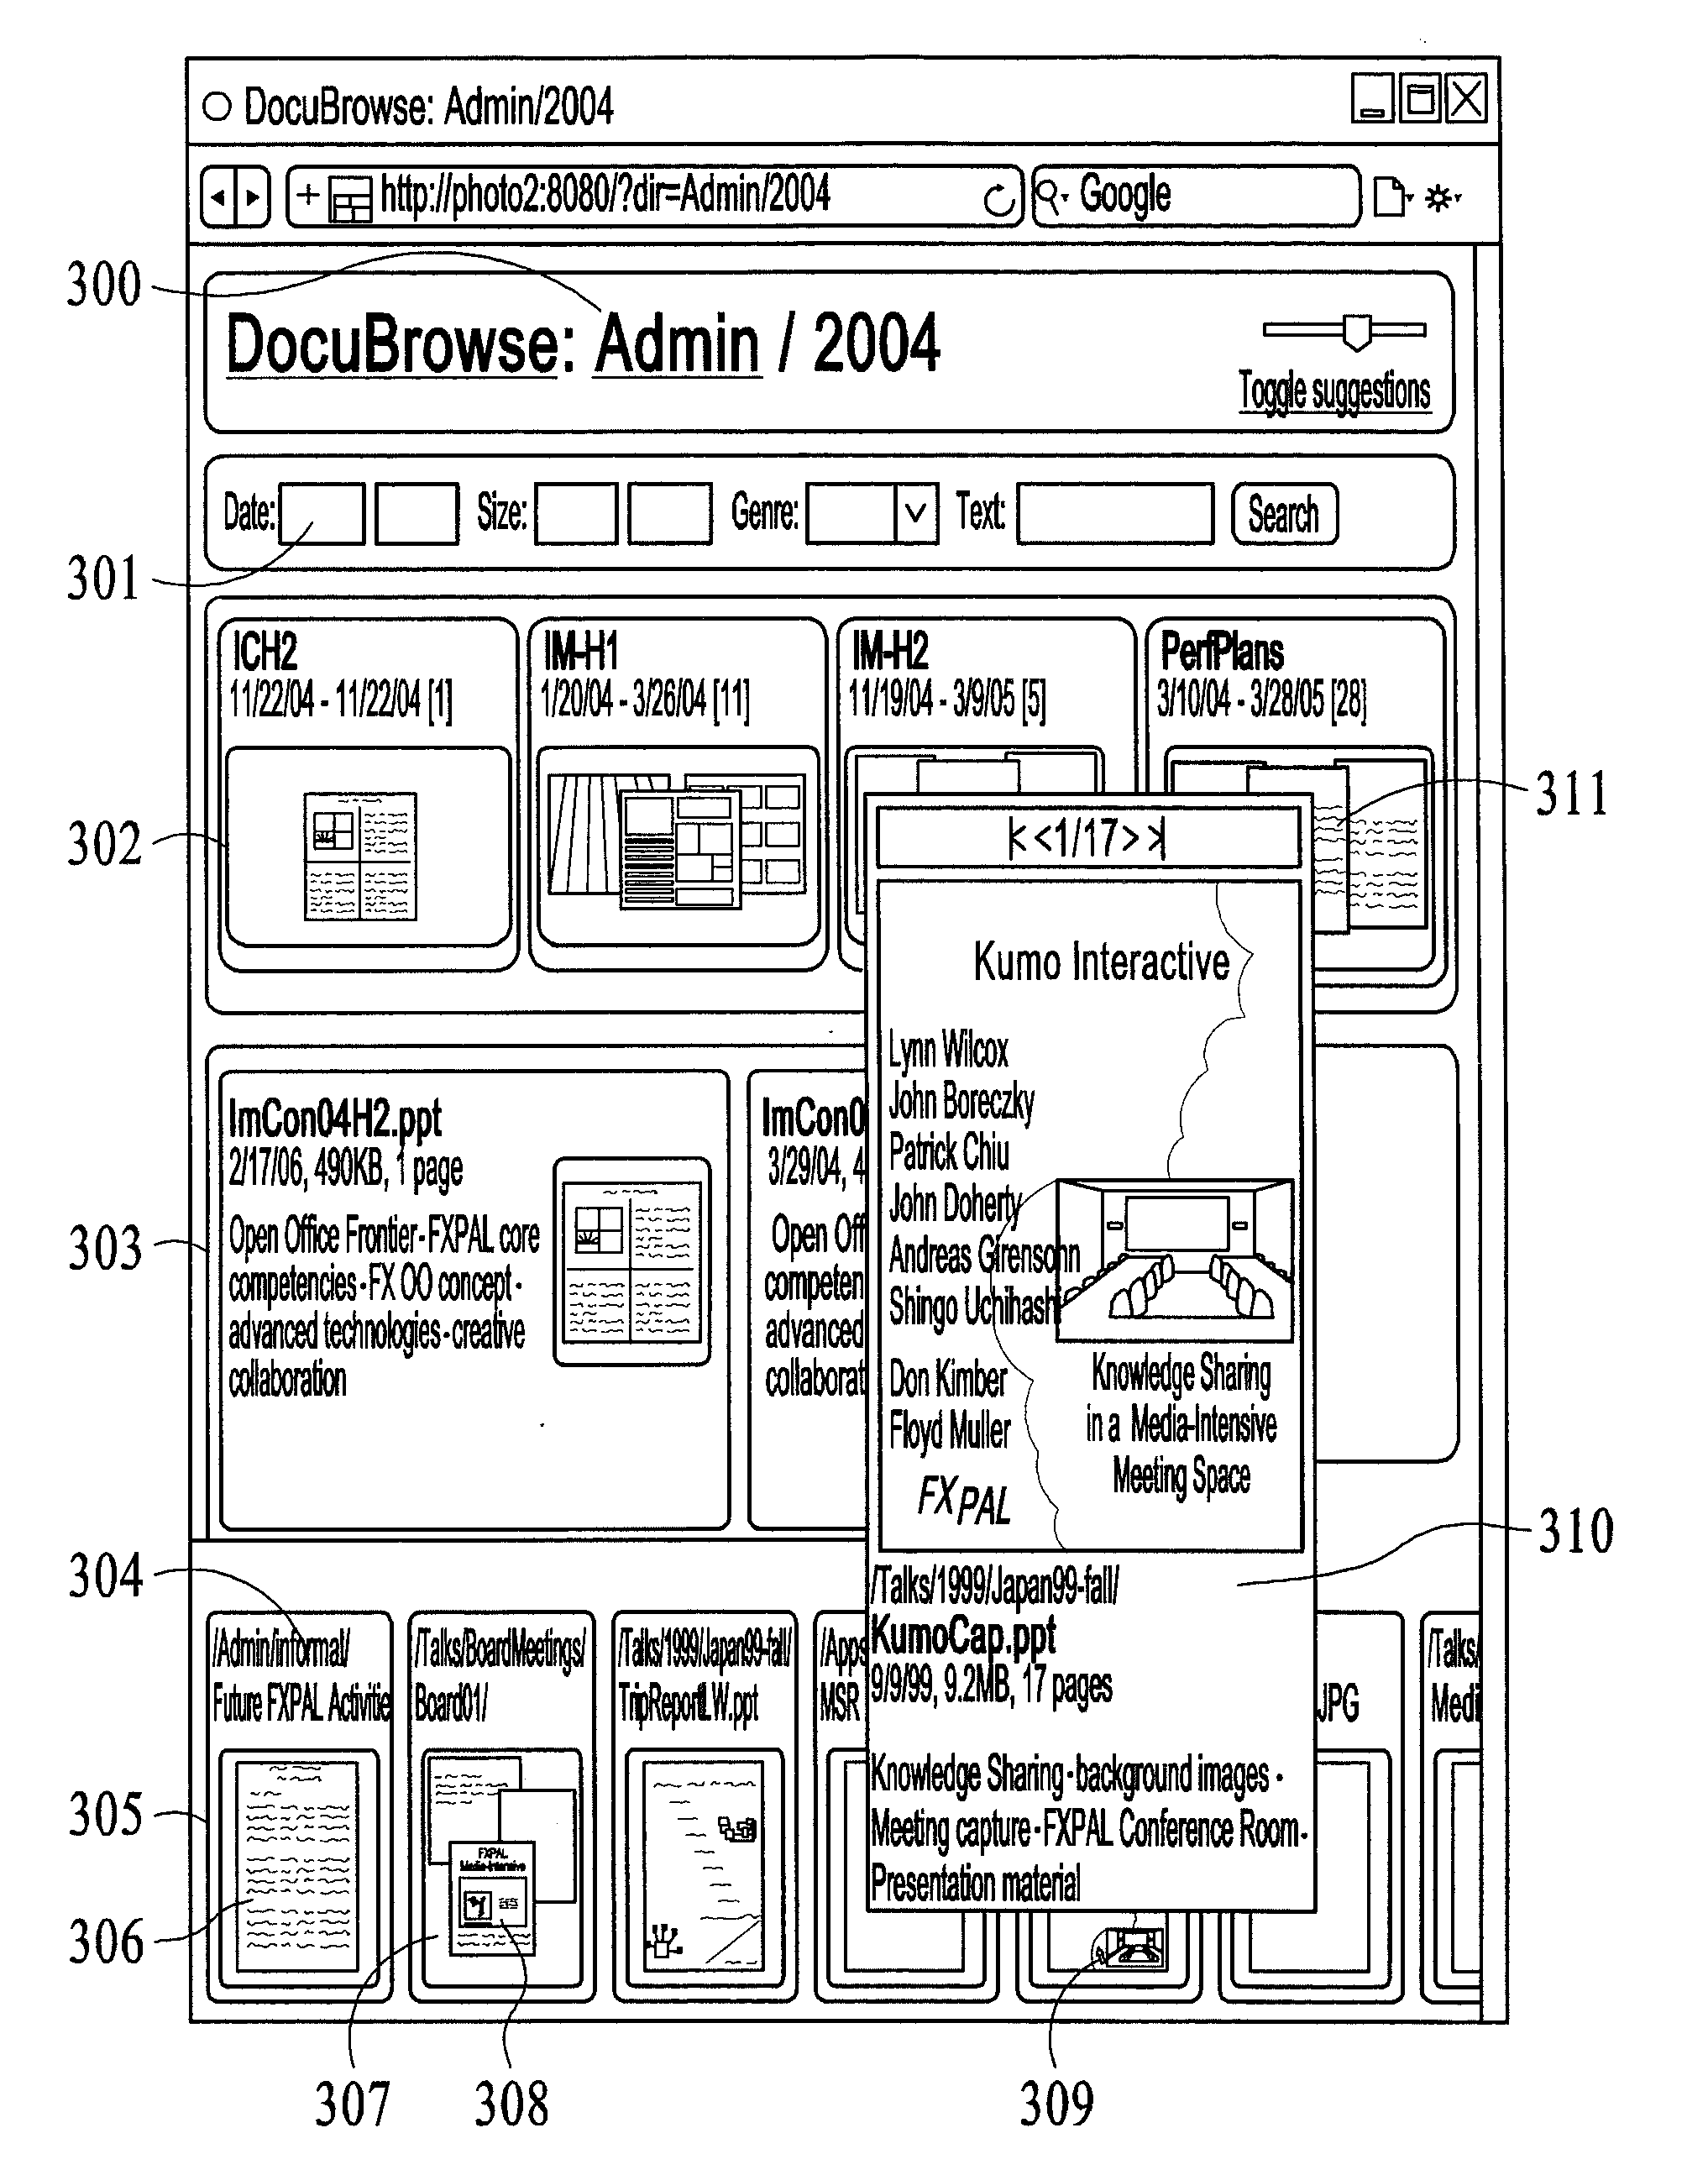 Method for recommending enterprise documents and directories based on access logs